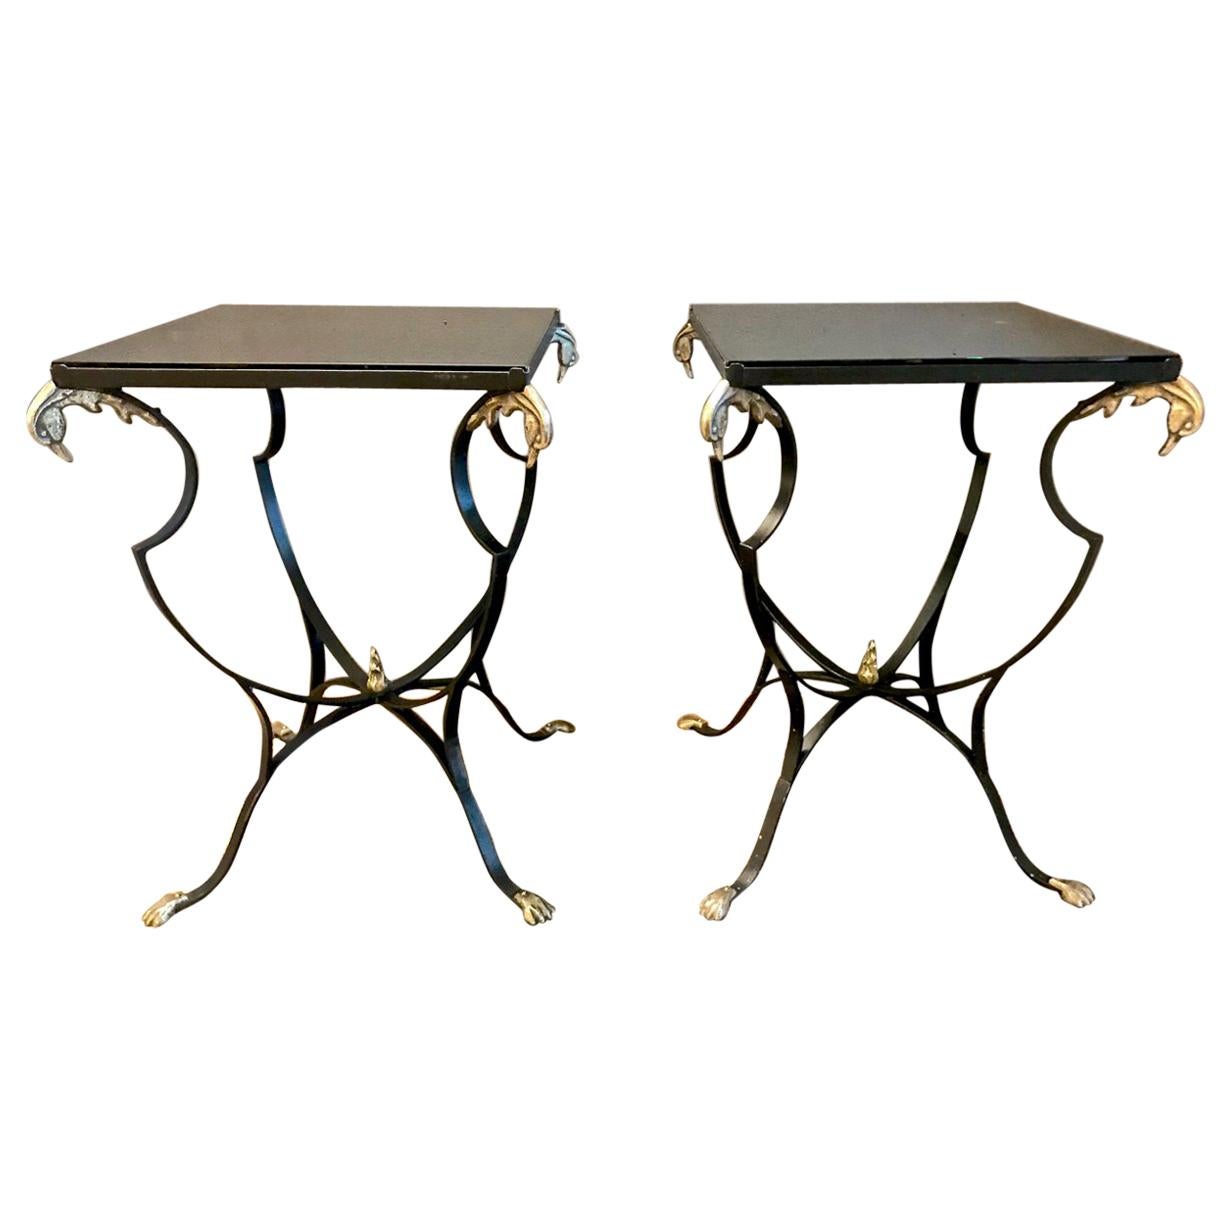 Pair of French Art Deco Forged Iron and Brass Side Tables